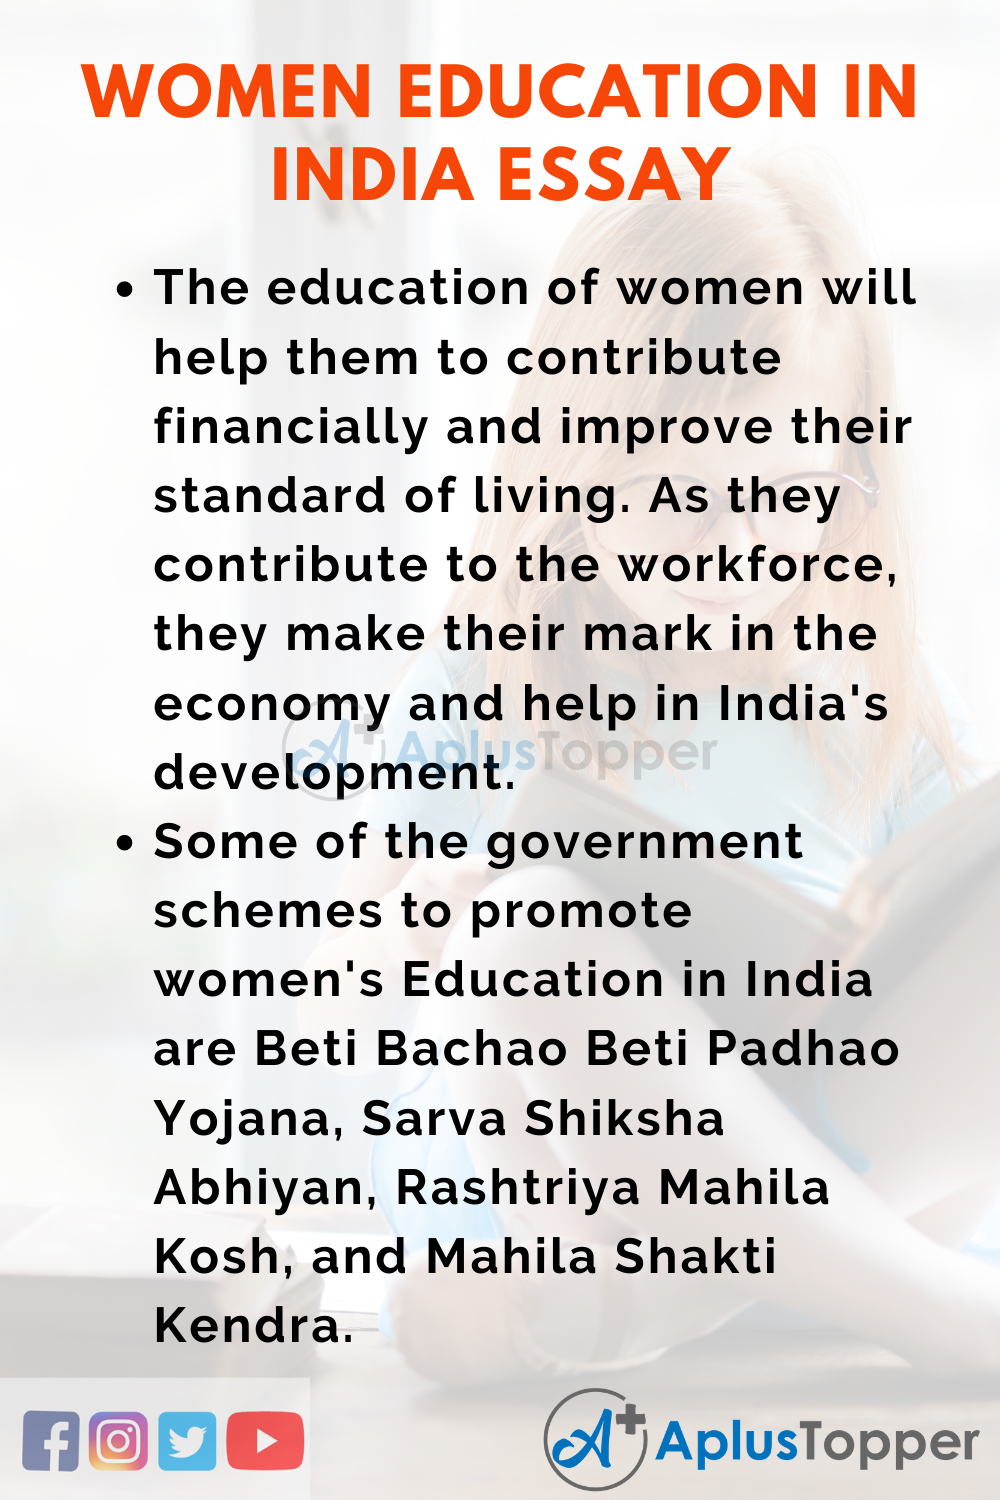 importance of women's education in india essay